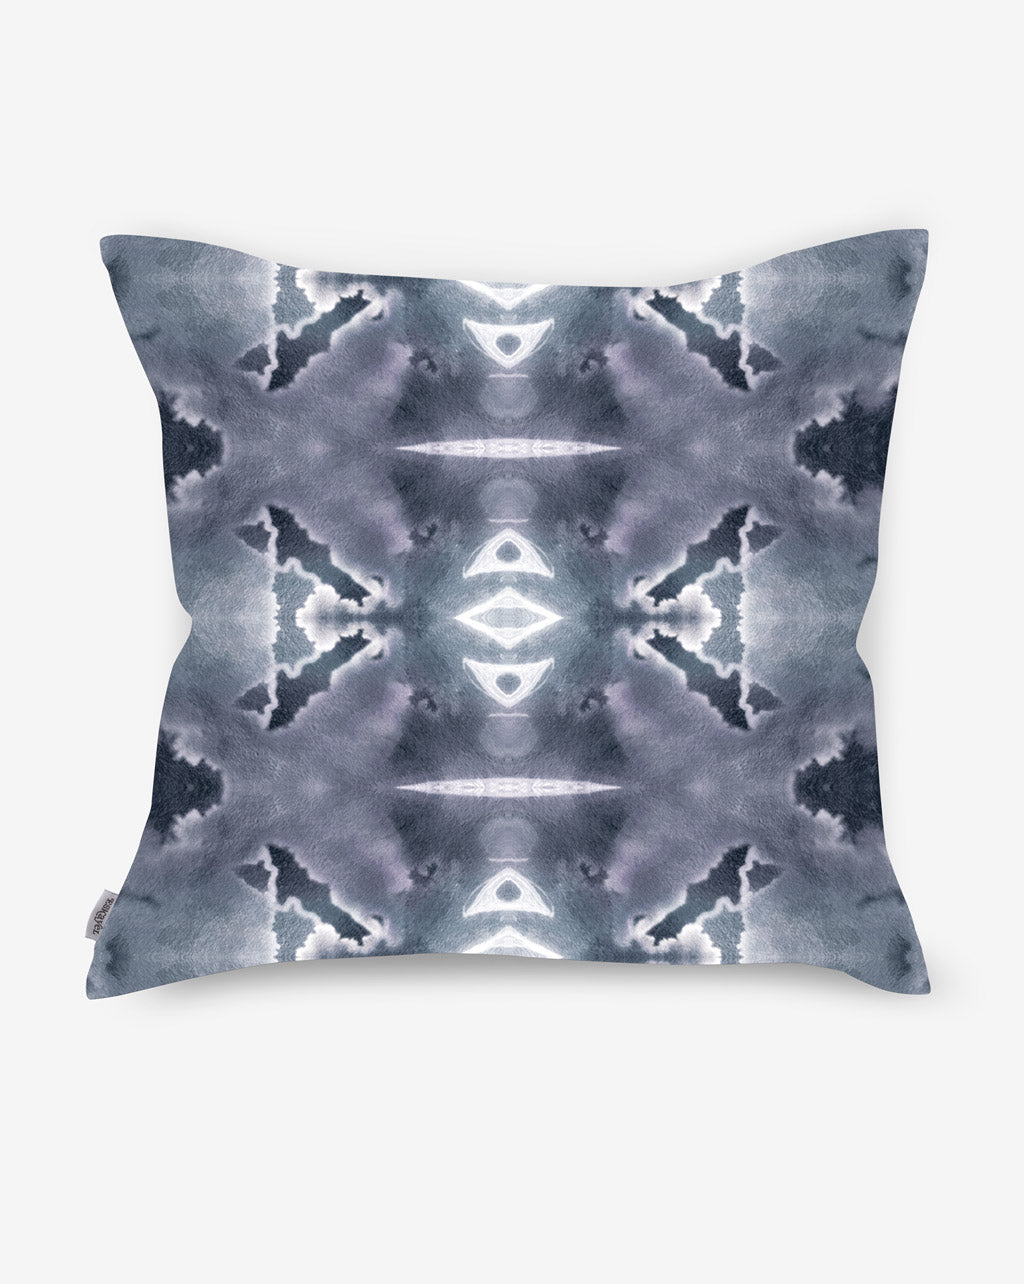 A Septaria Outdoor Pillow Dark with a blue design on it